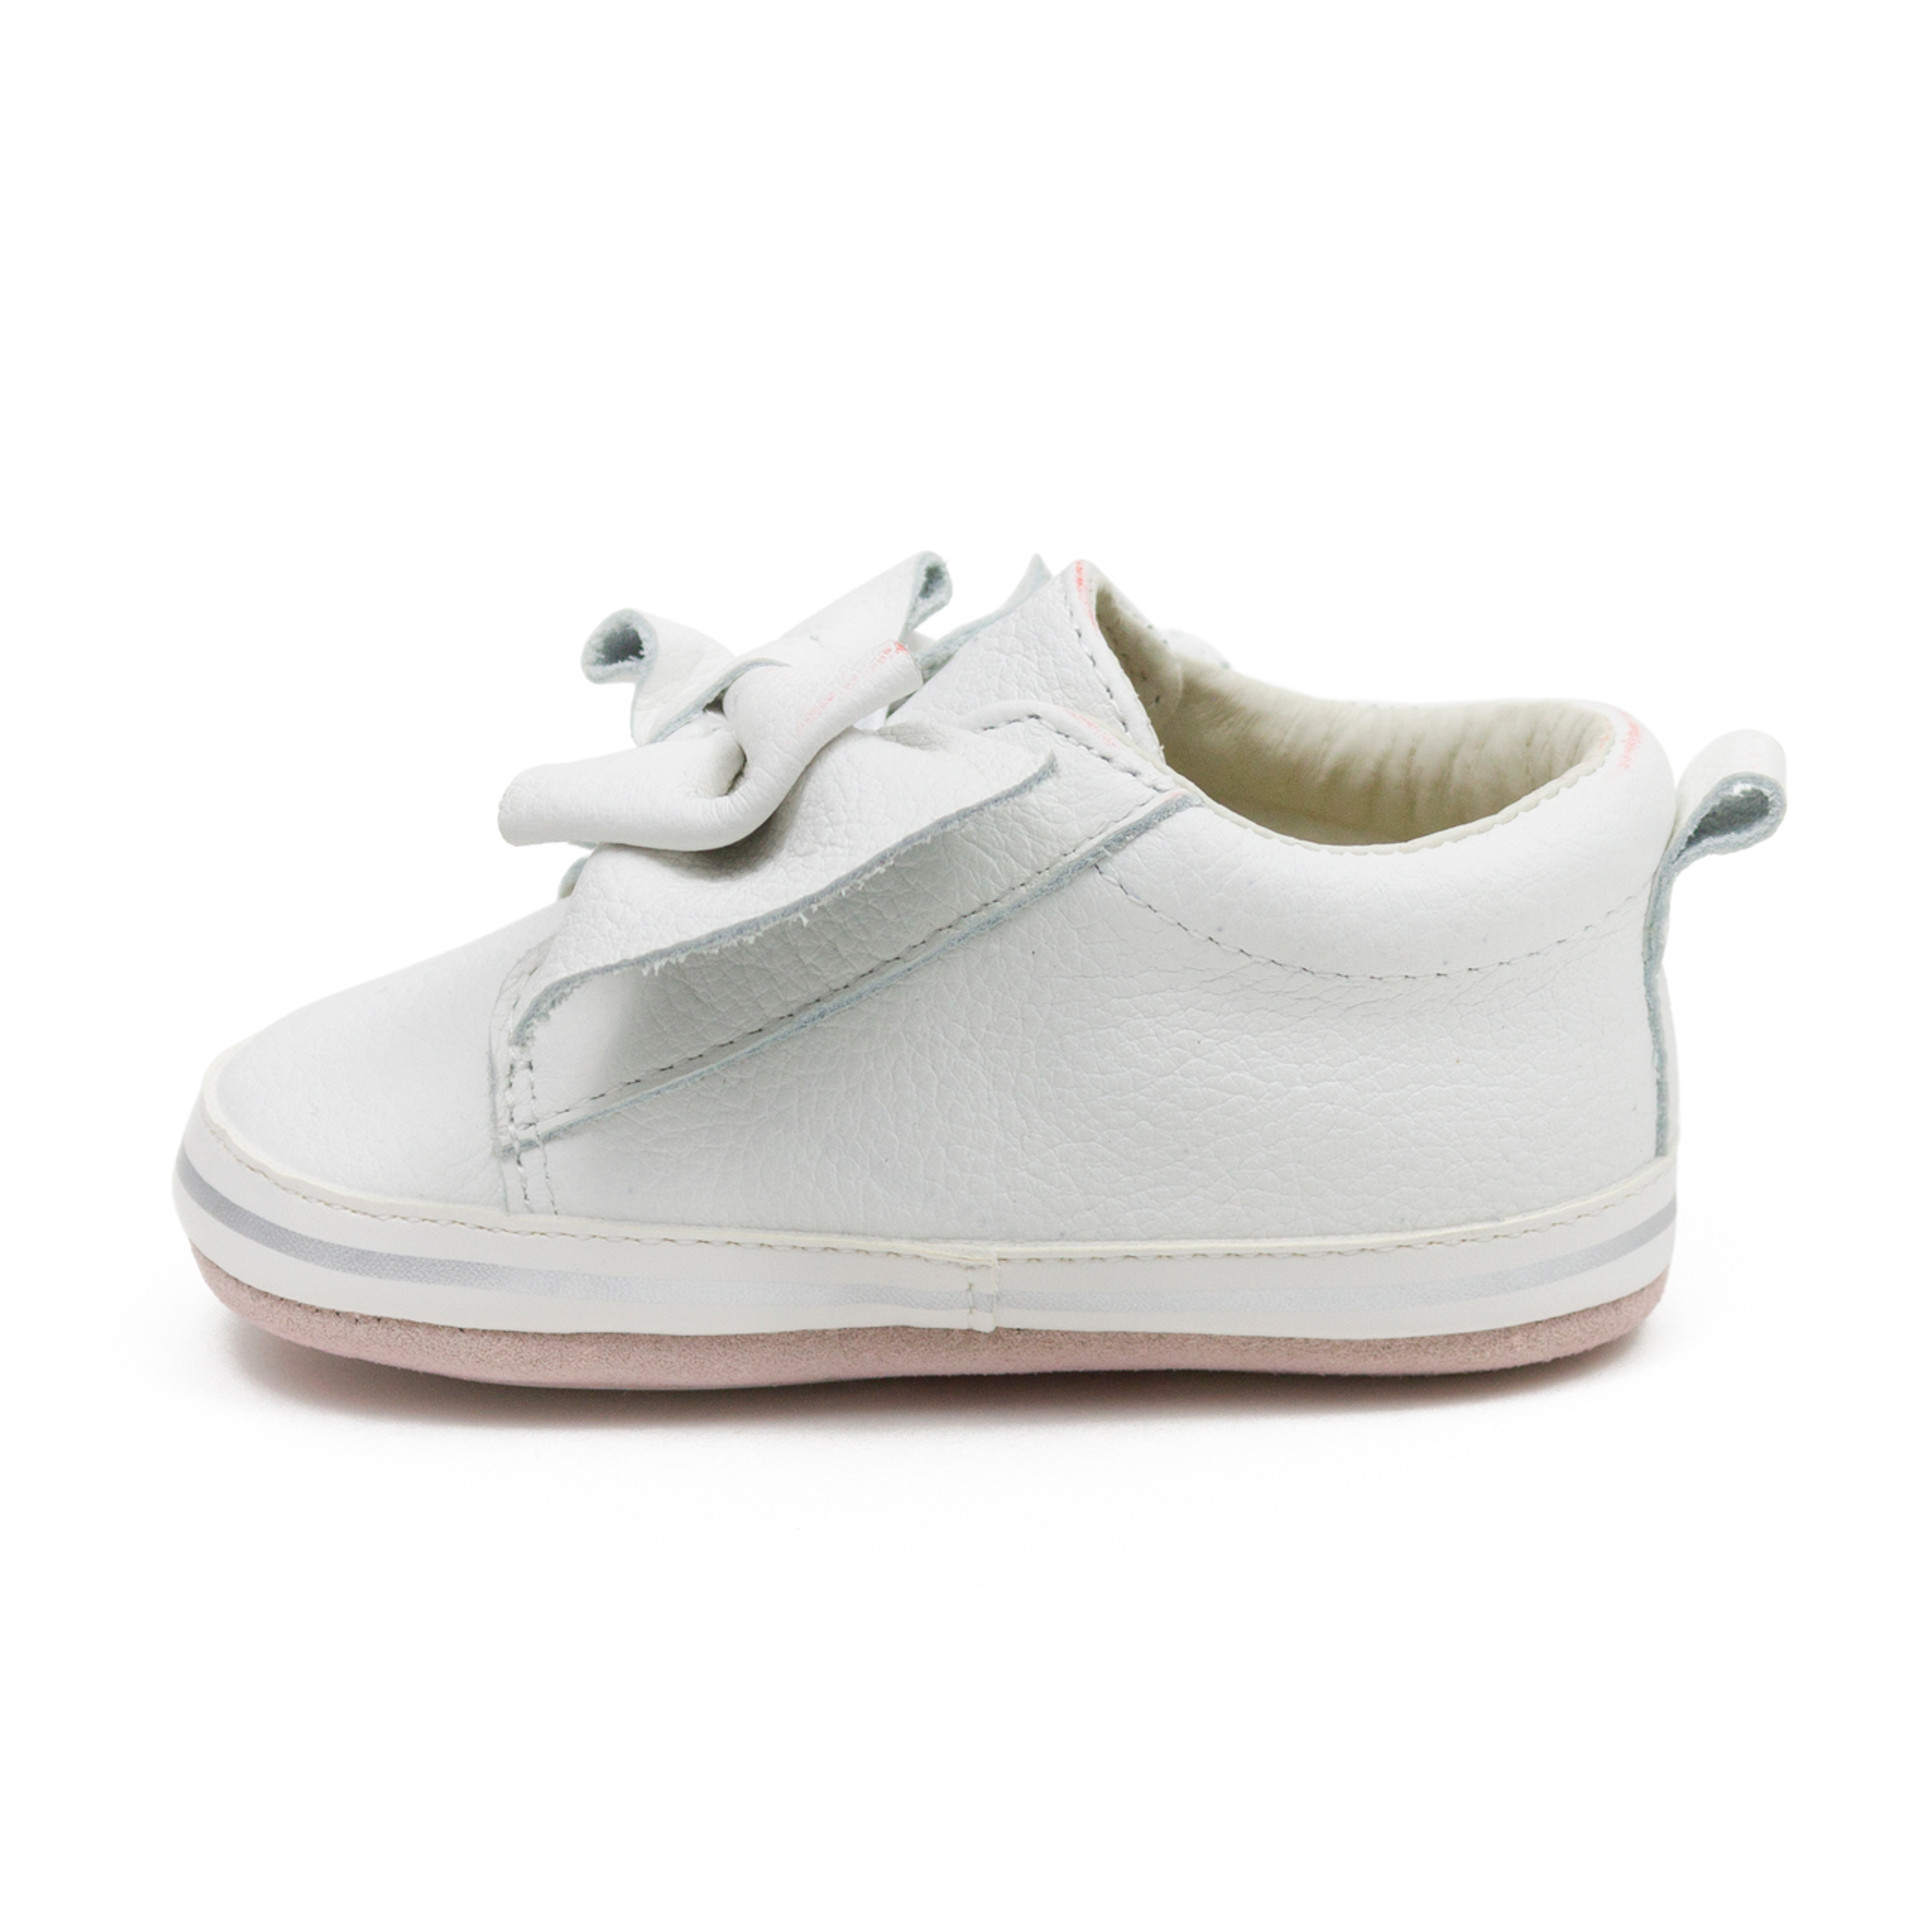 White Baby Shoes | Kick-Proof Baby Shoes | Shop Robeez